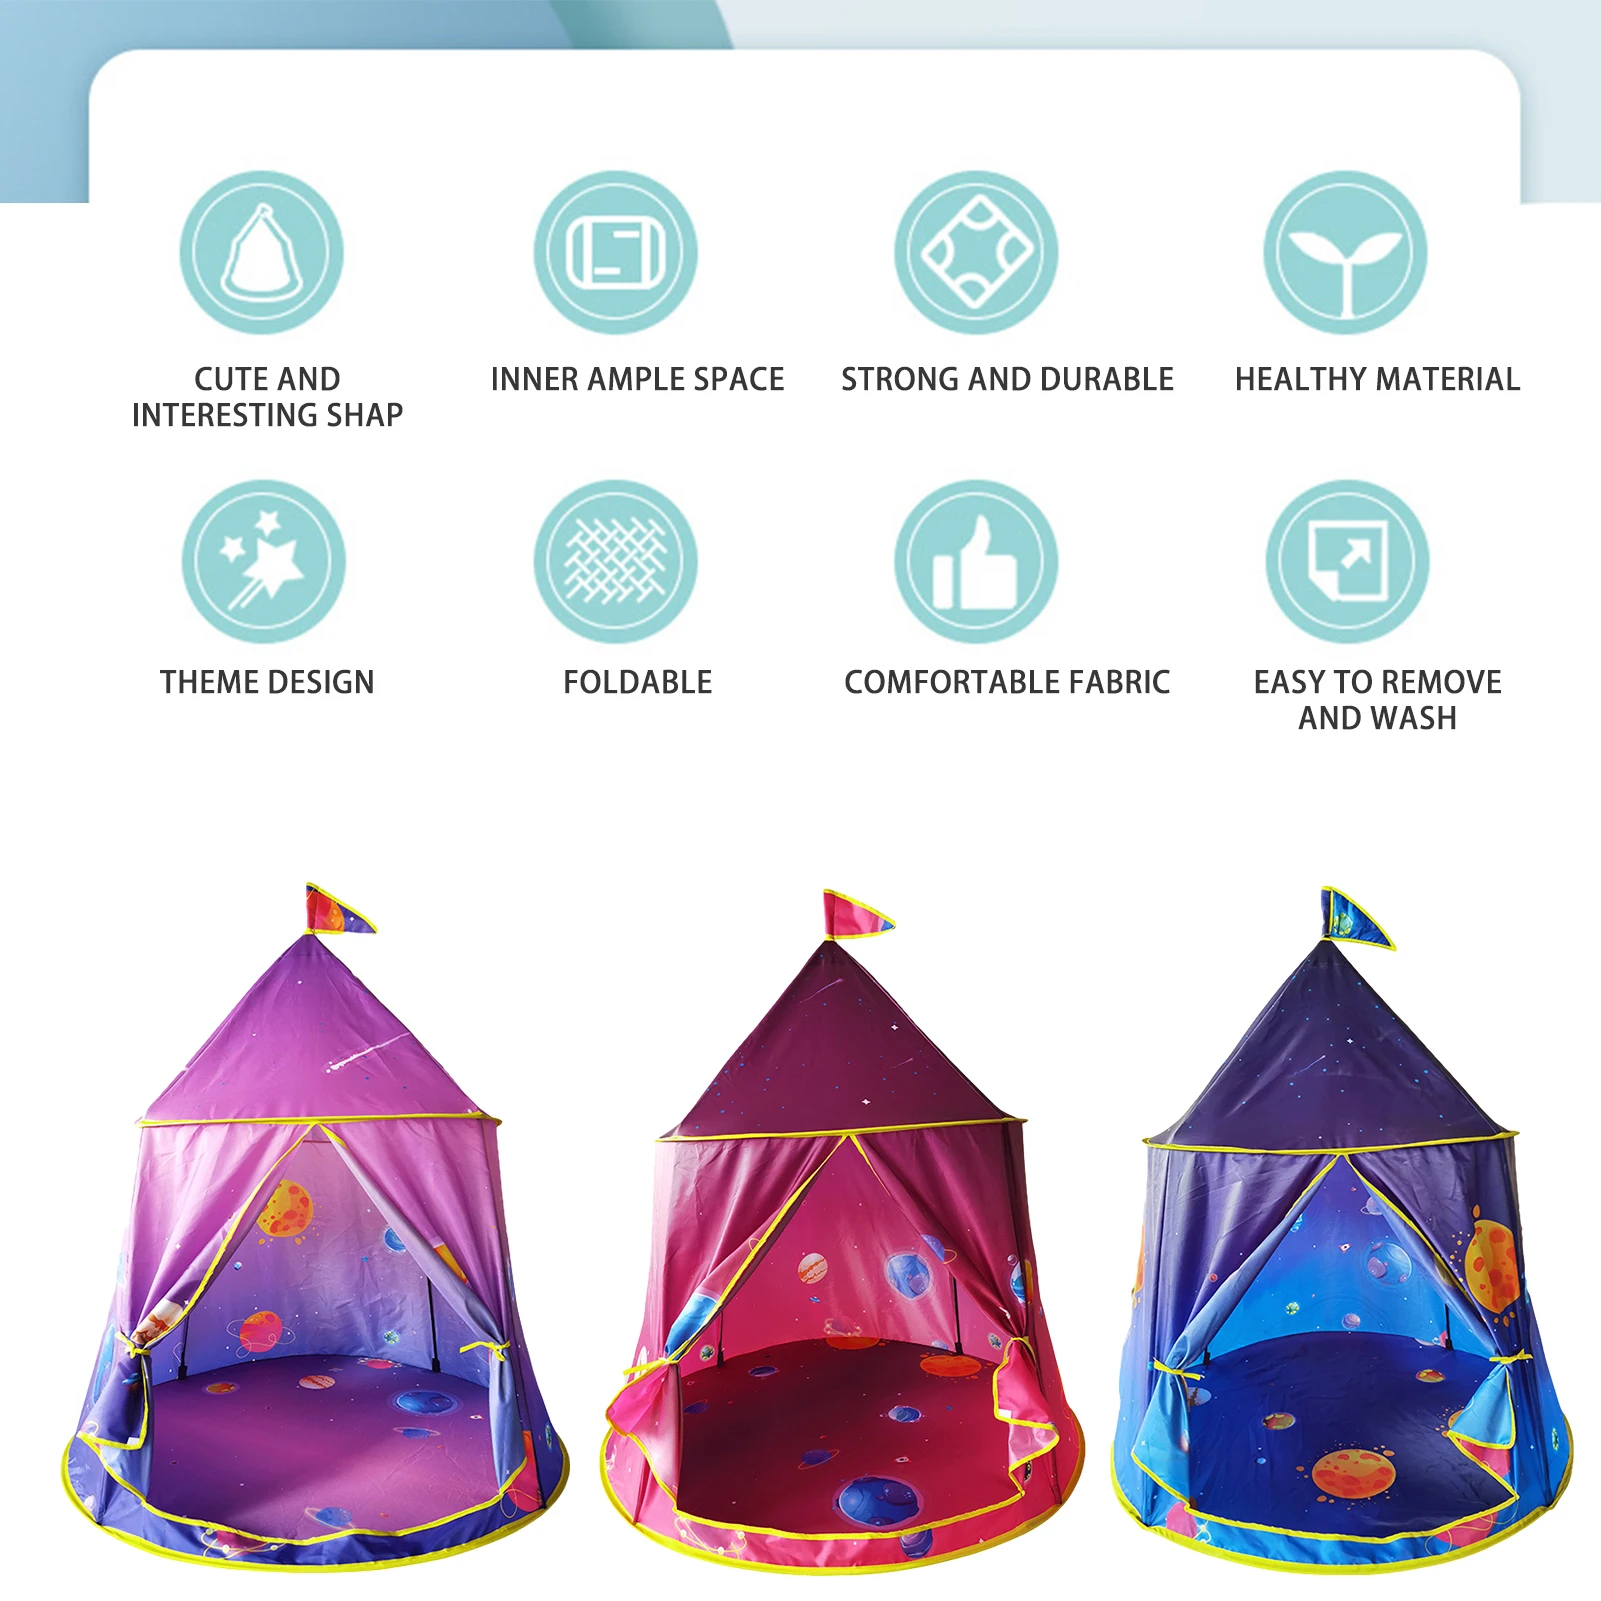 

Space World Play Tent Playhouse Indoor Privacy Yurt Tent For Kids Outdoor Novelty And Fun Toys High Quality Color House suitable